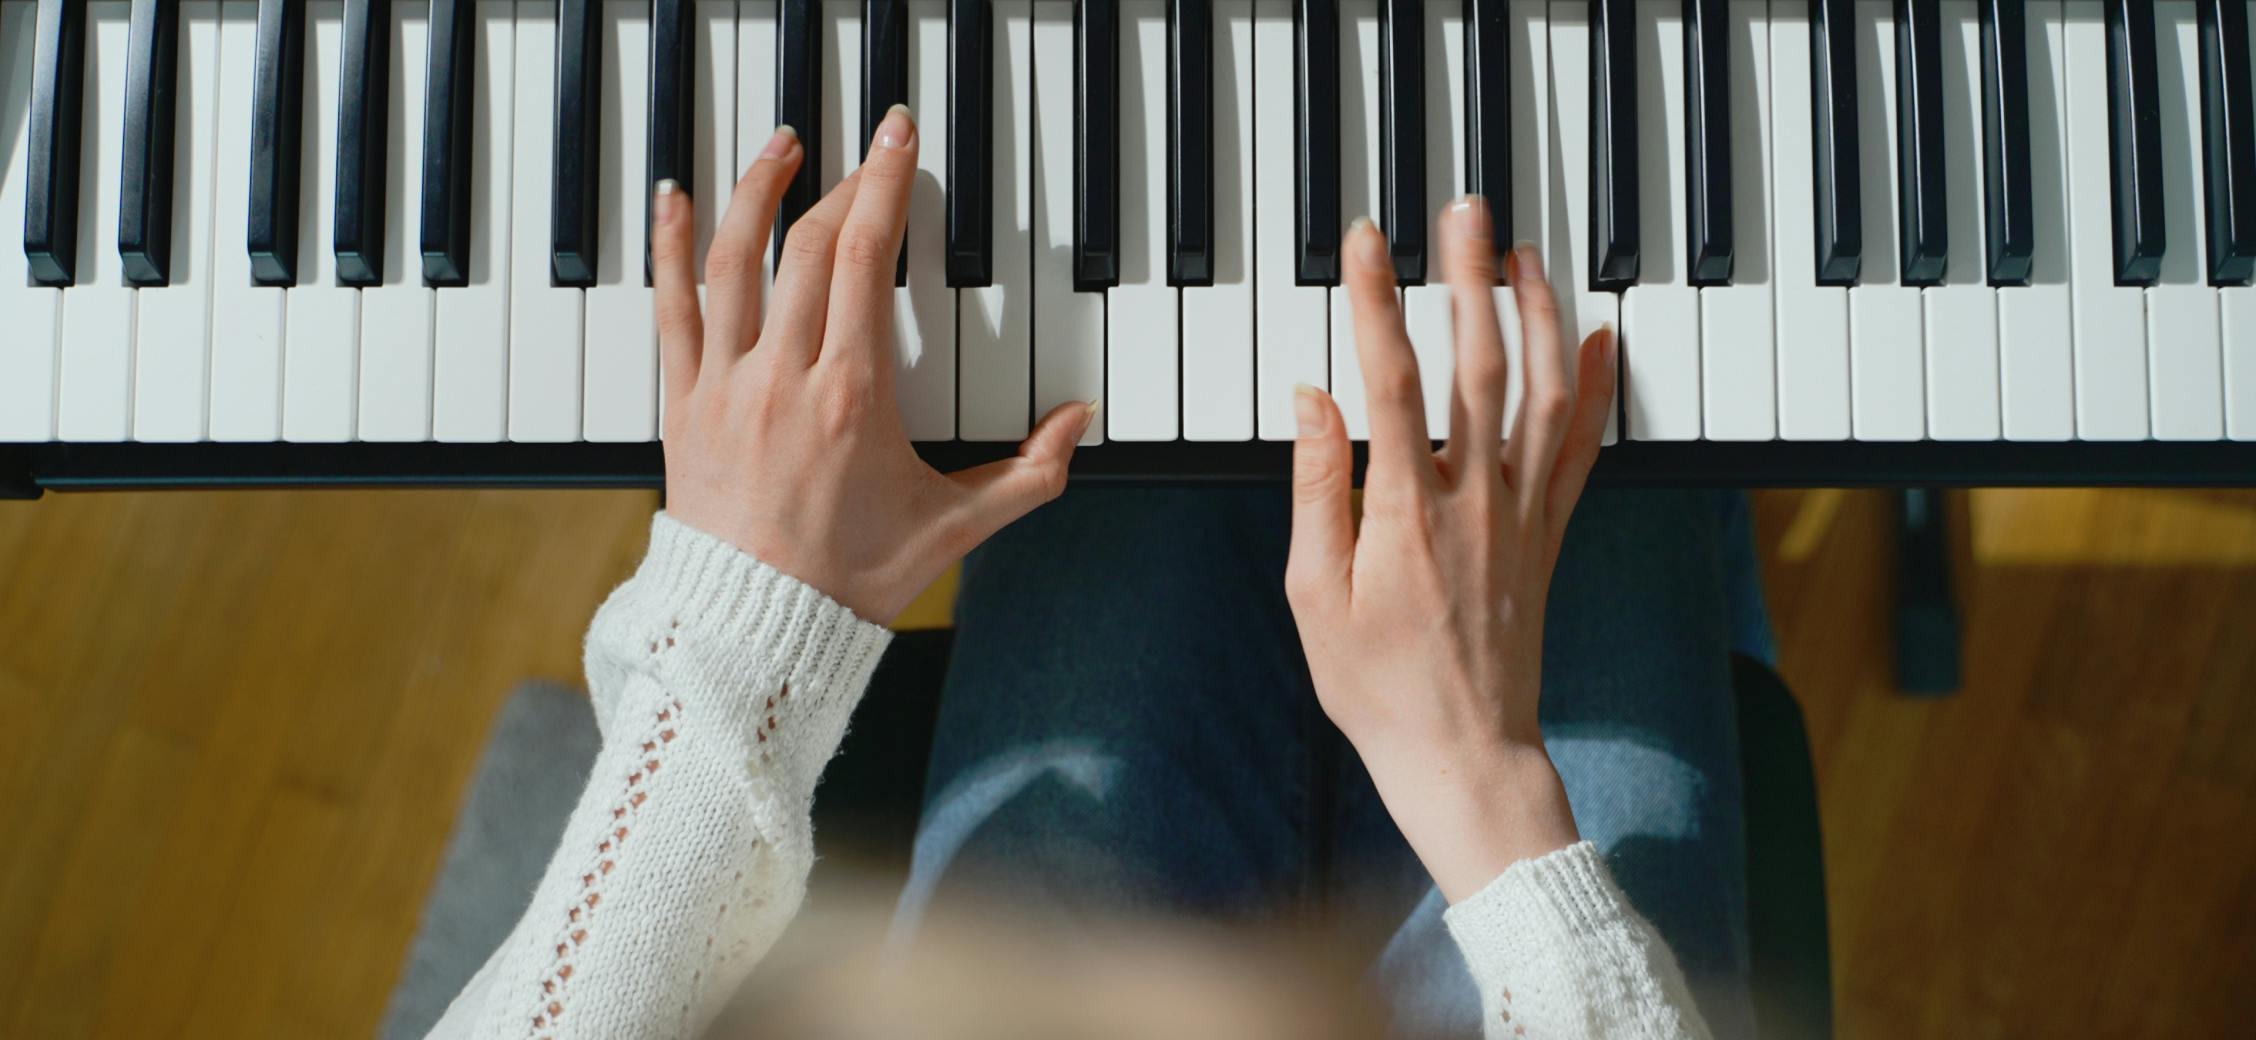 LUMI Keys and App: The world's first all-in-one platform for learning how to play piano! Compact, portable, and wireless, LUMI Keys travel wherever you want to make music. With a light-up keyboard, games, lessons, and popular songs find a fun and easy way to learn how to play piano. 